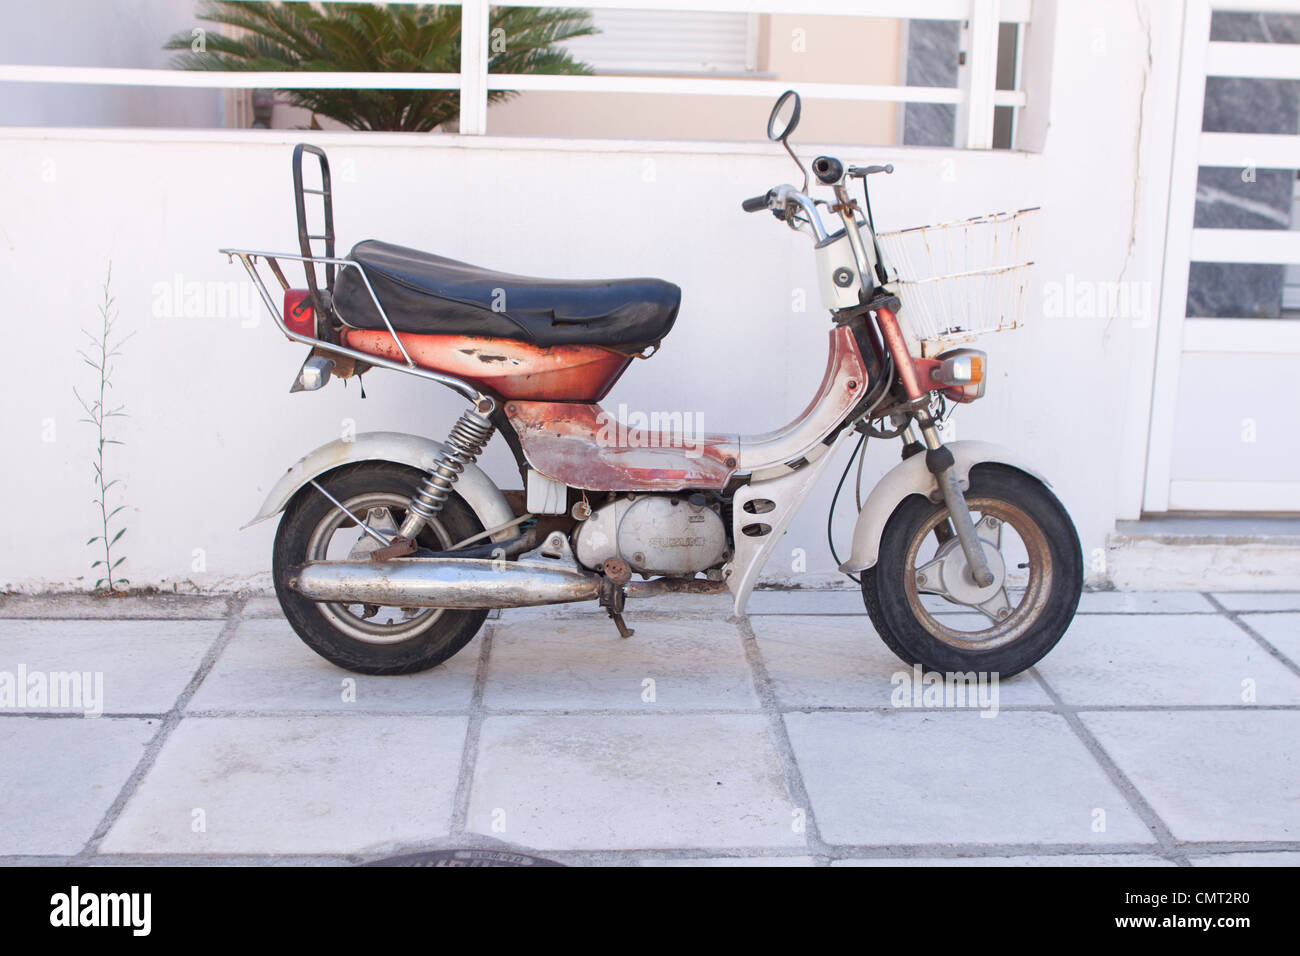 Old 'monki bike' moped scooter Stock Photo